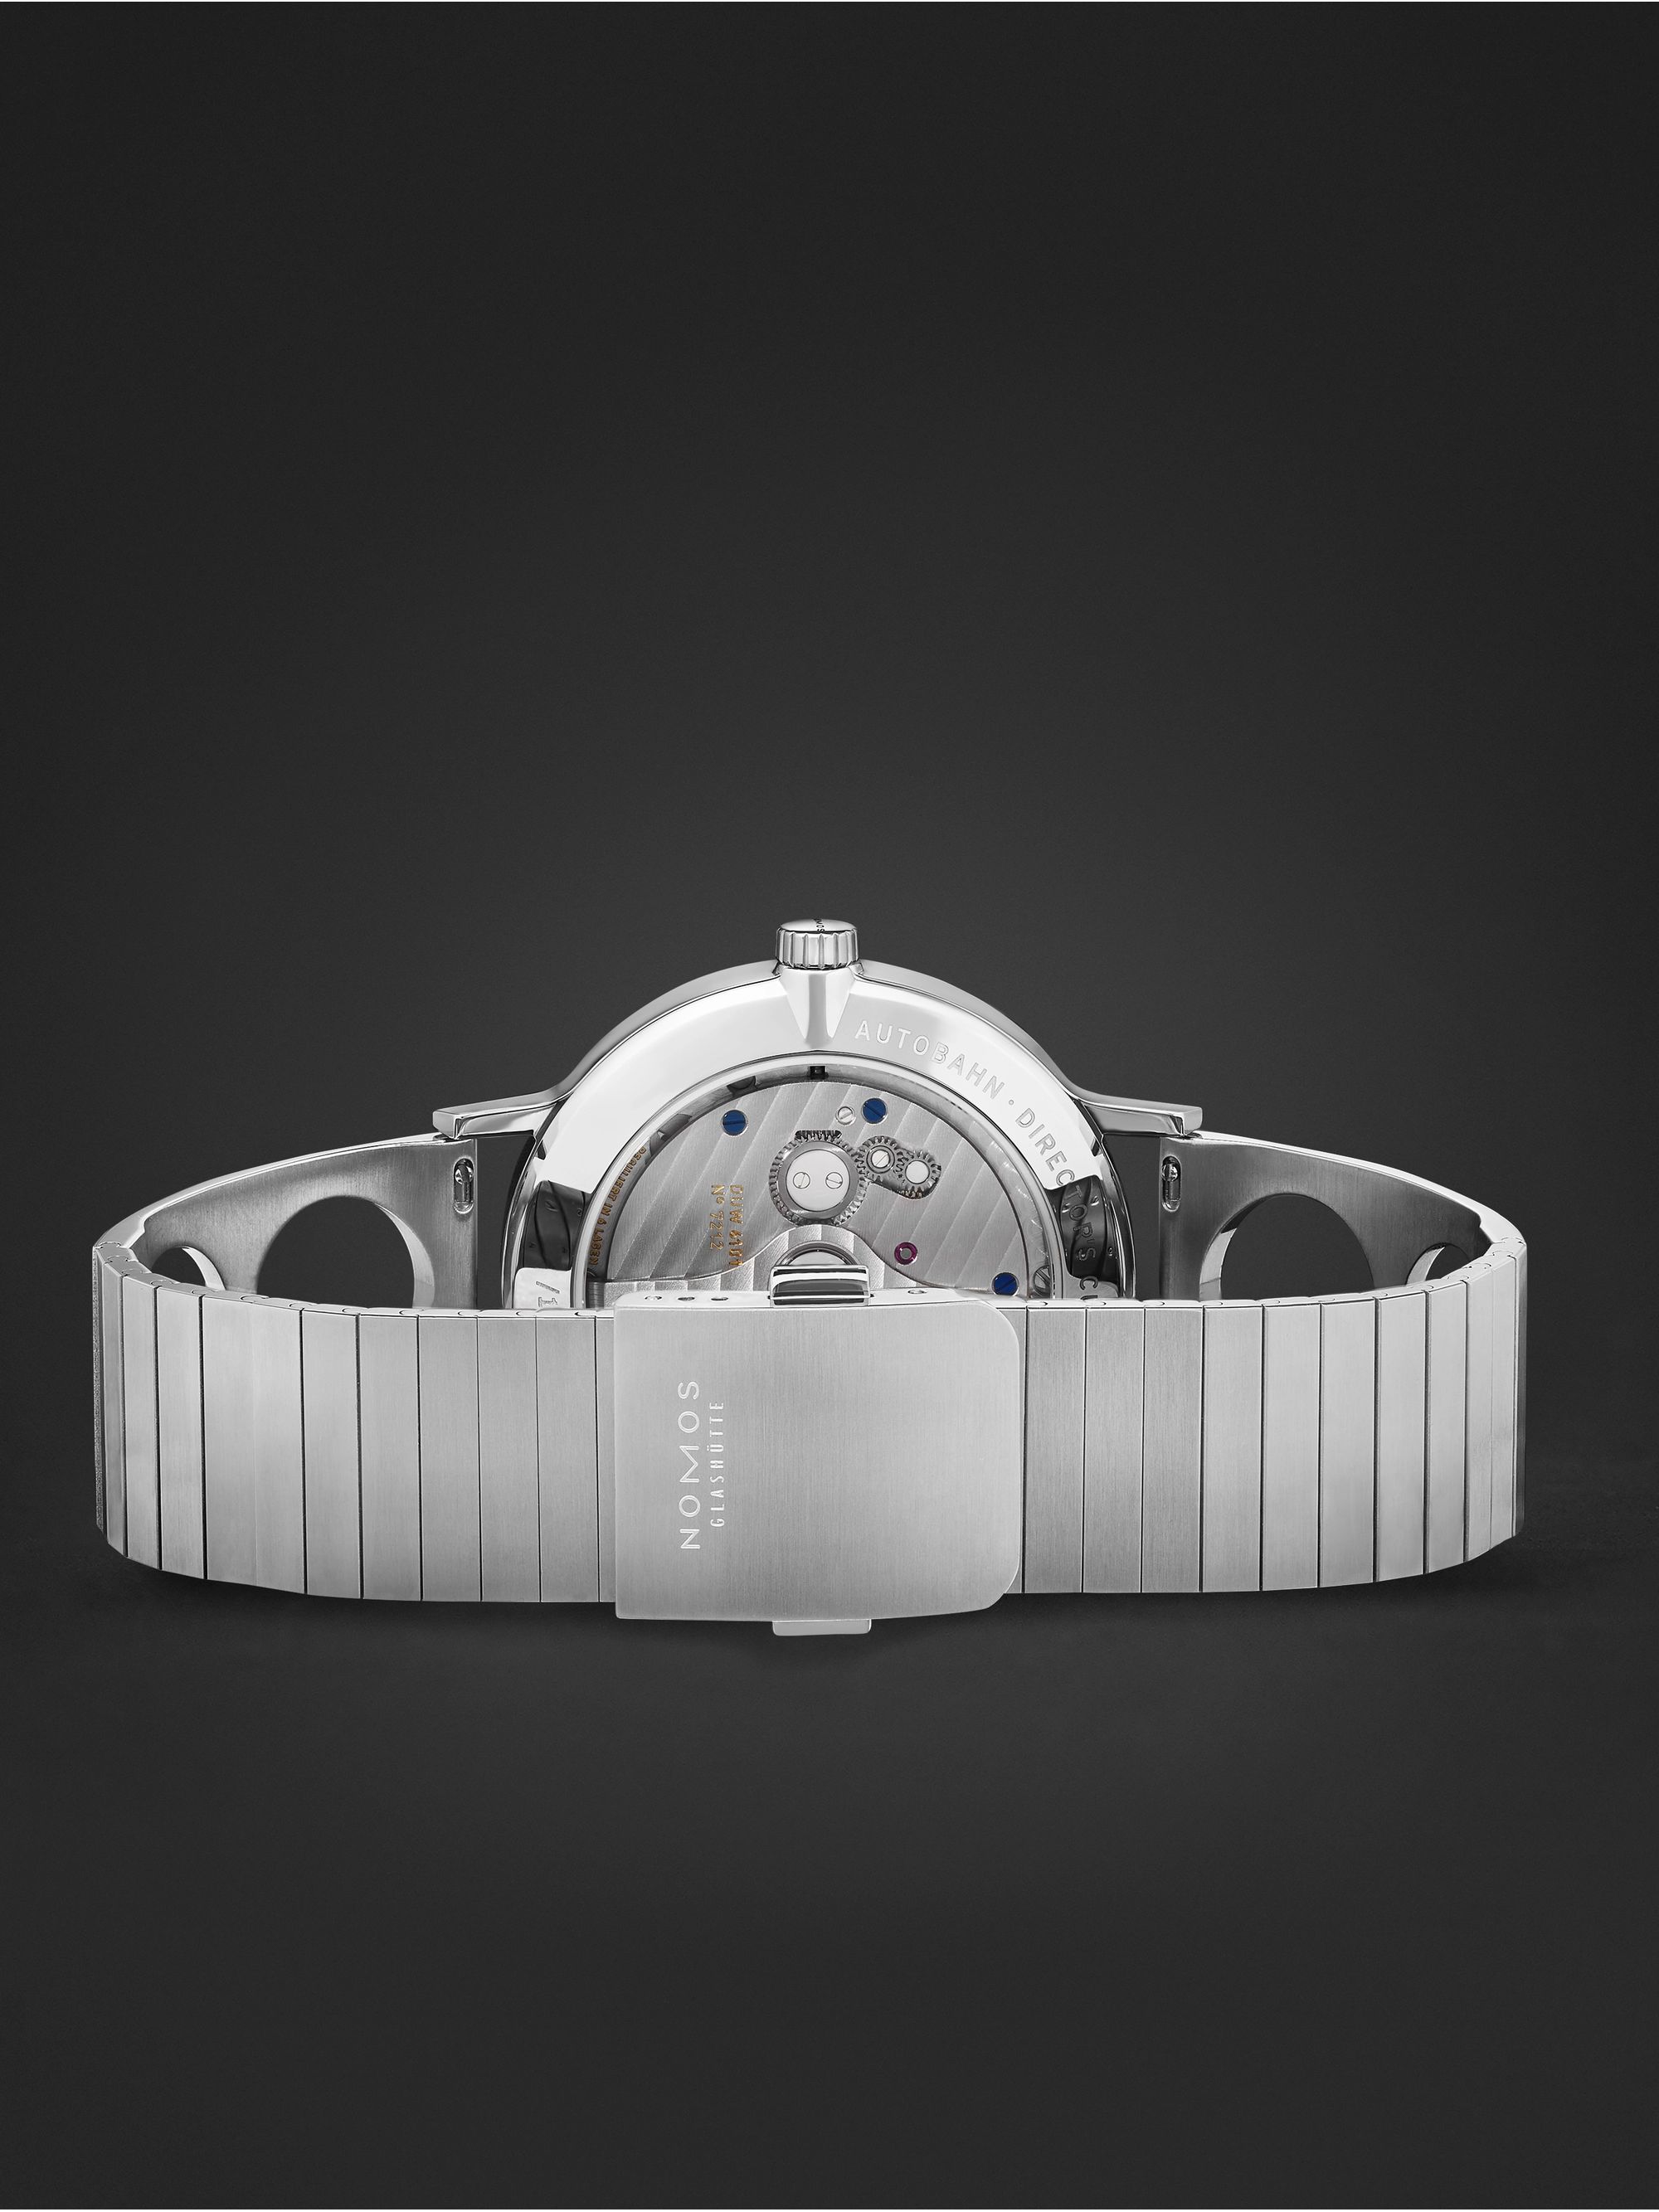 NOMOS GLASHÜTTE Autobahn Director‘s Cut A9 Limited Edition Automatic 41mm Stainless Steel Watch, Ref. No. 1301.S3